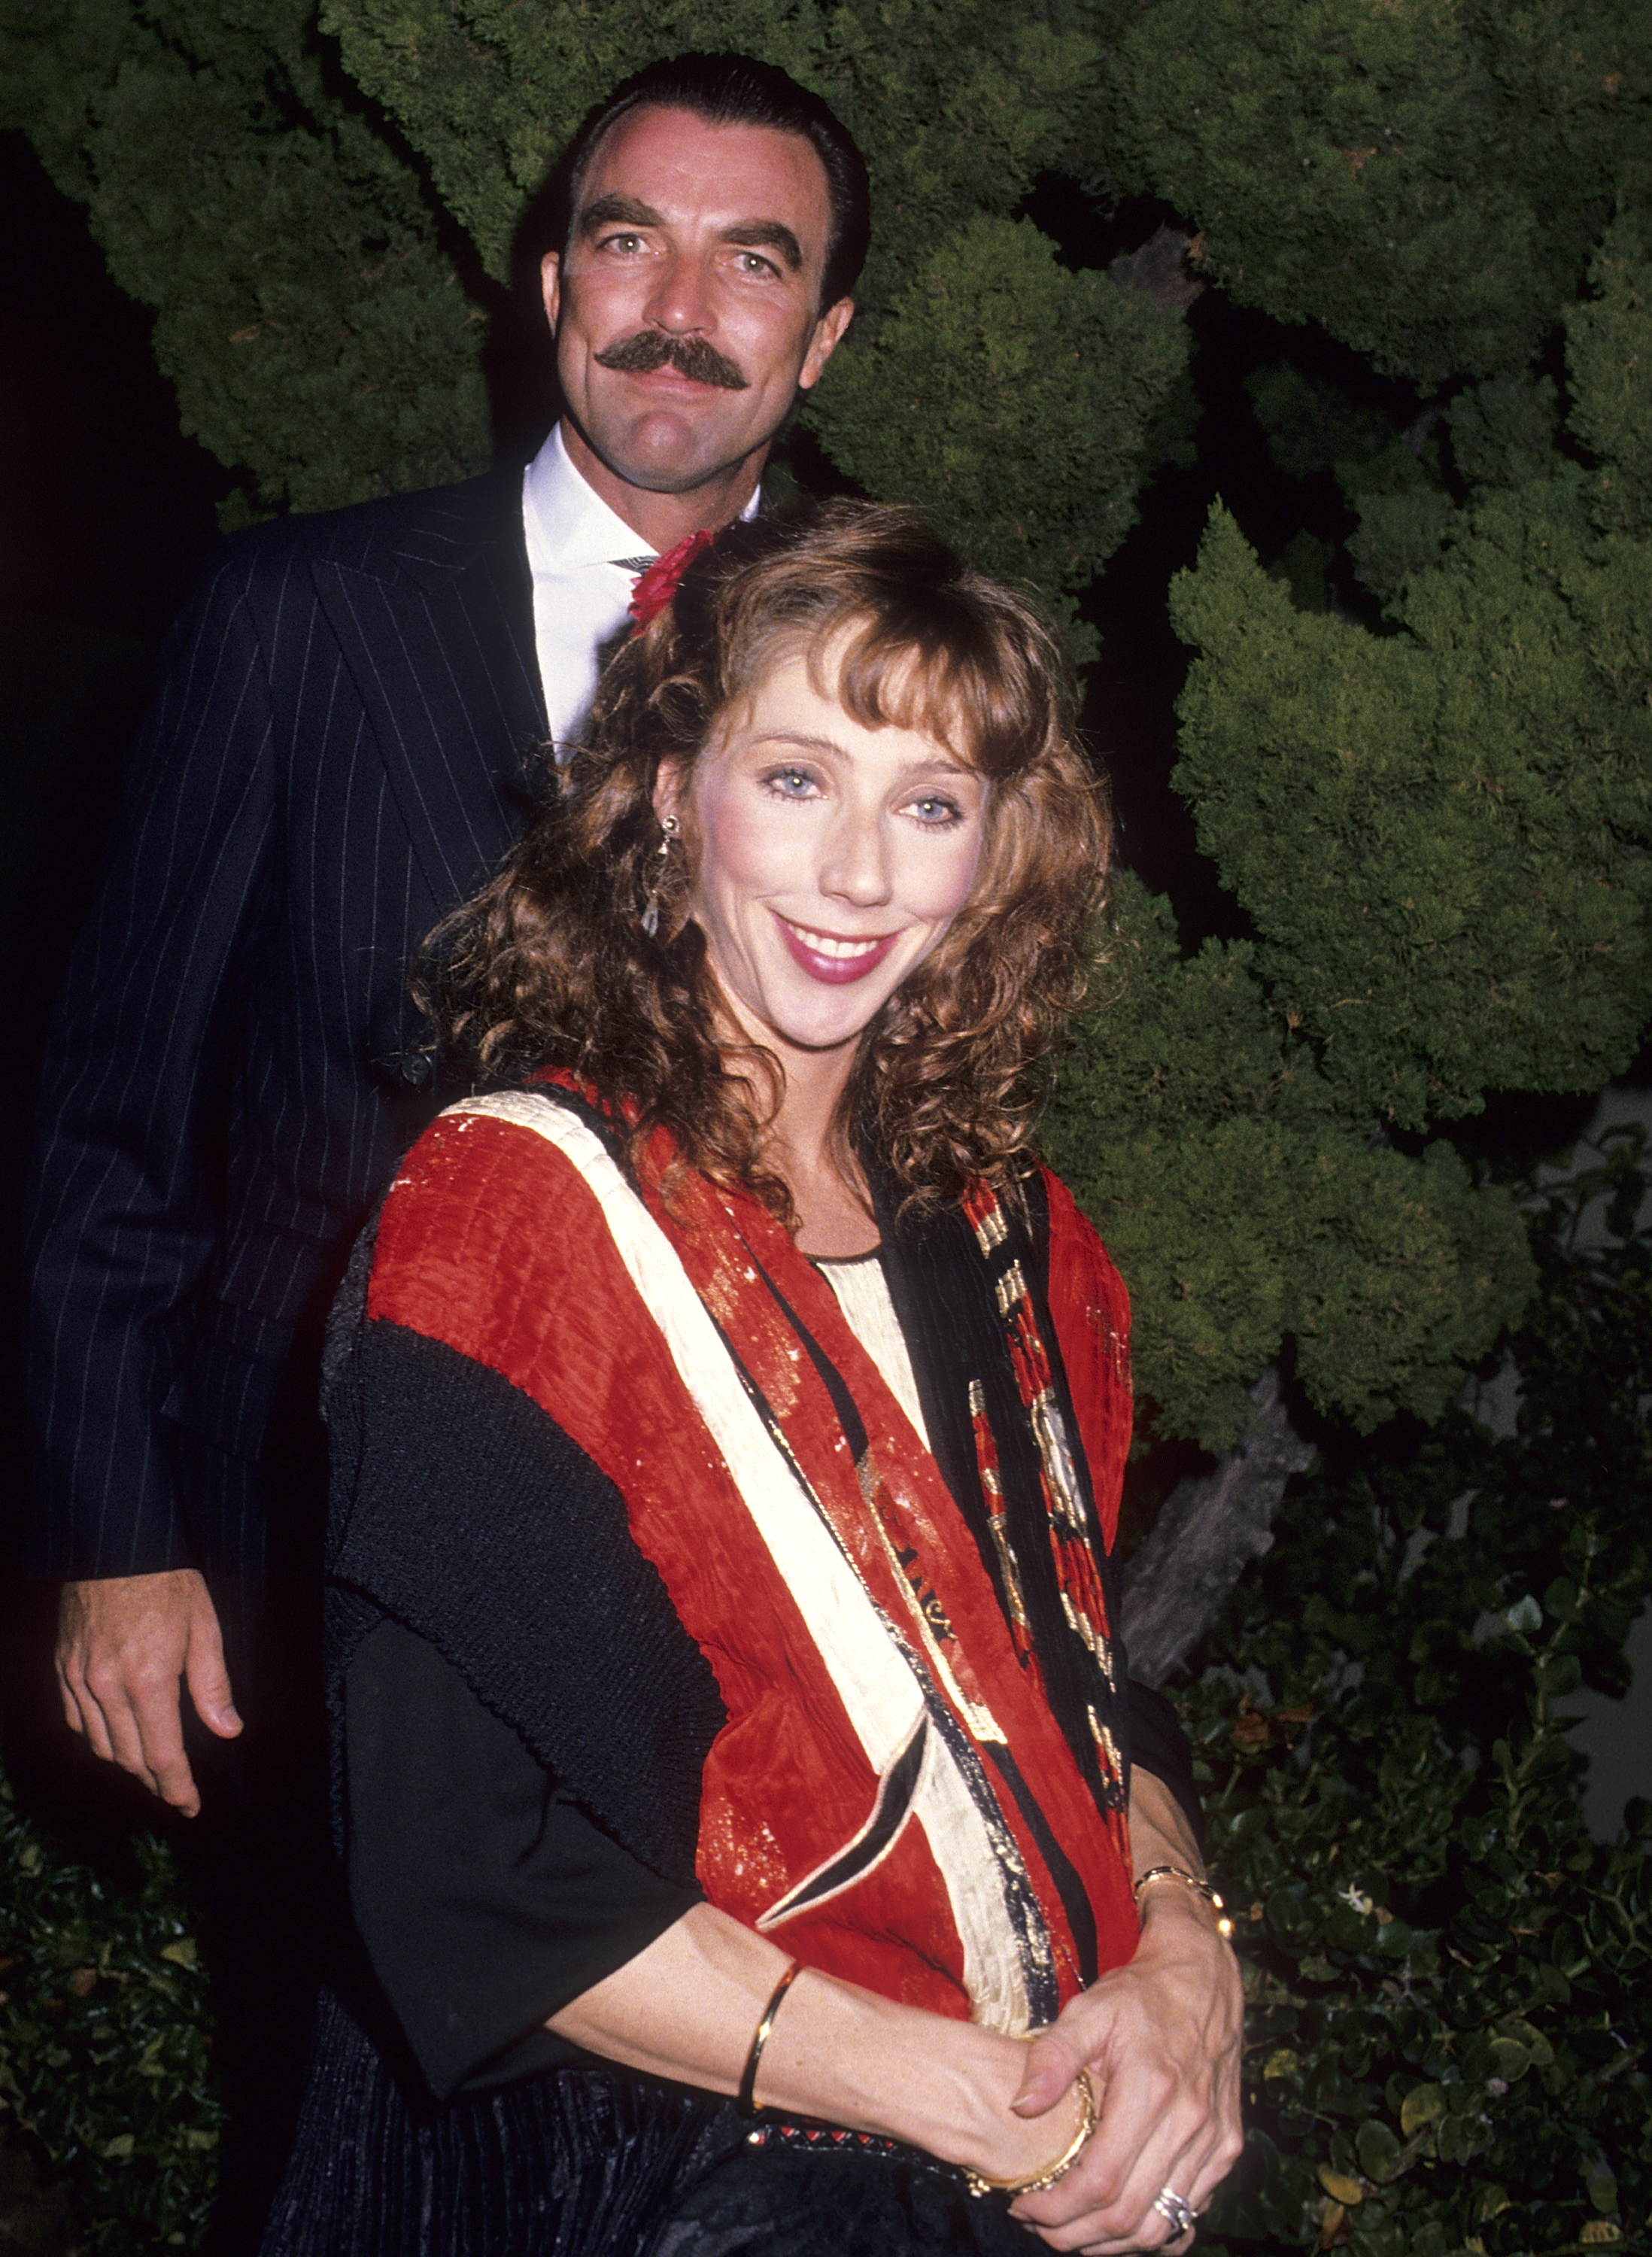 Tom Selleck and Jillie Mack attend a concert at The Forum in Inglewood, California on November 26, 1988. | Source: Getty Images